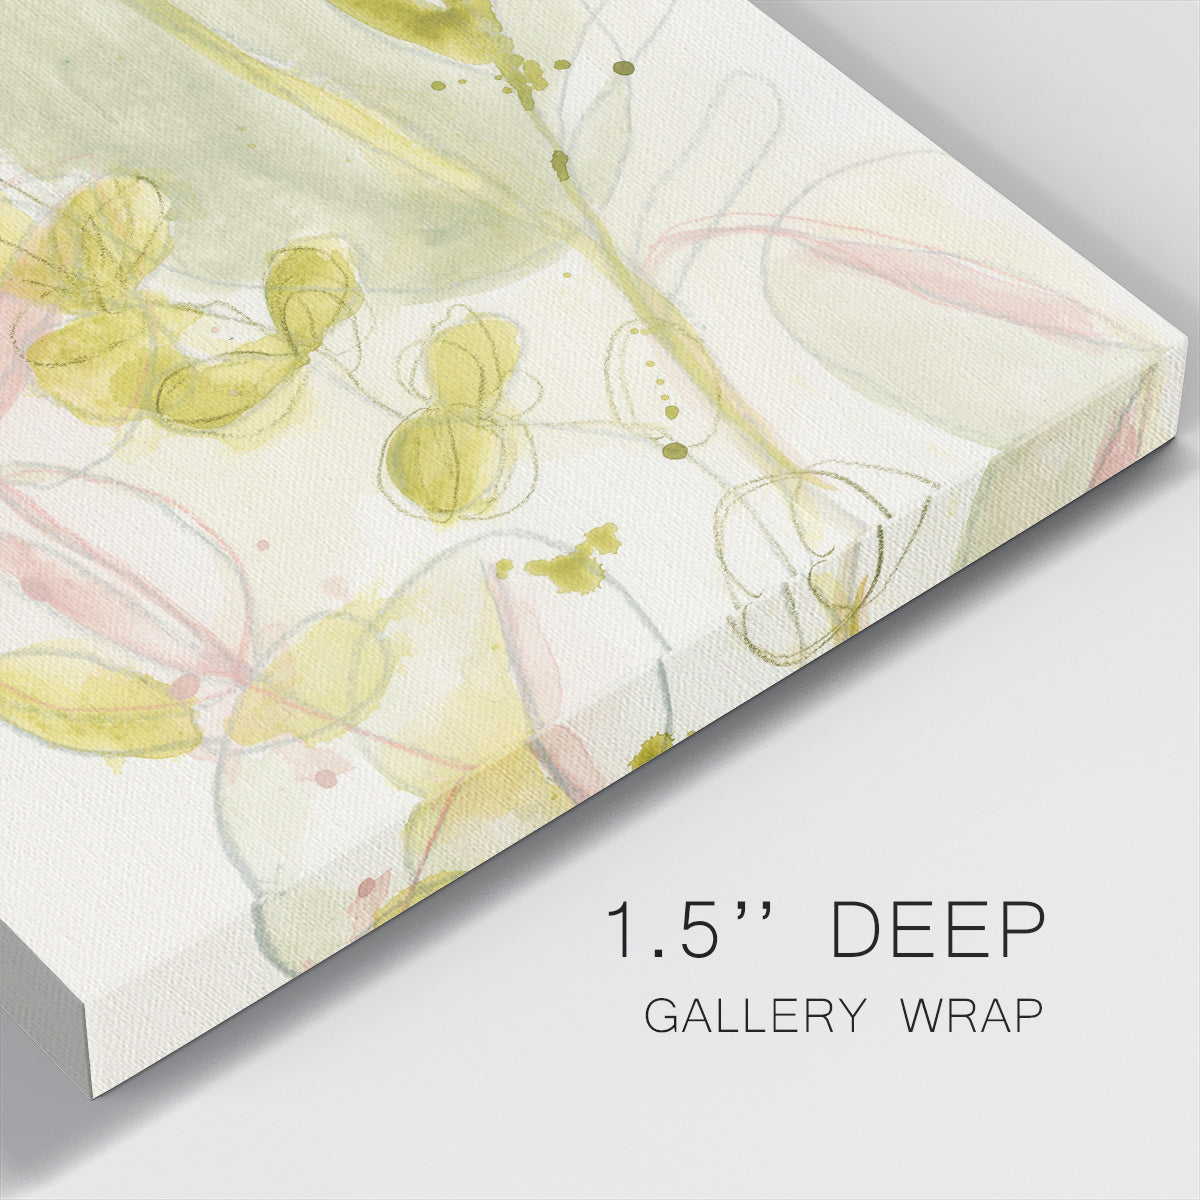 Celadon Trace I-Premium Gallery Wrapped Canvas - Ready to Hang